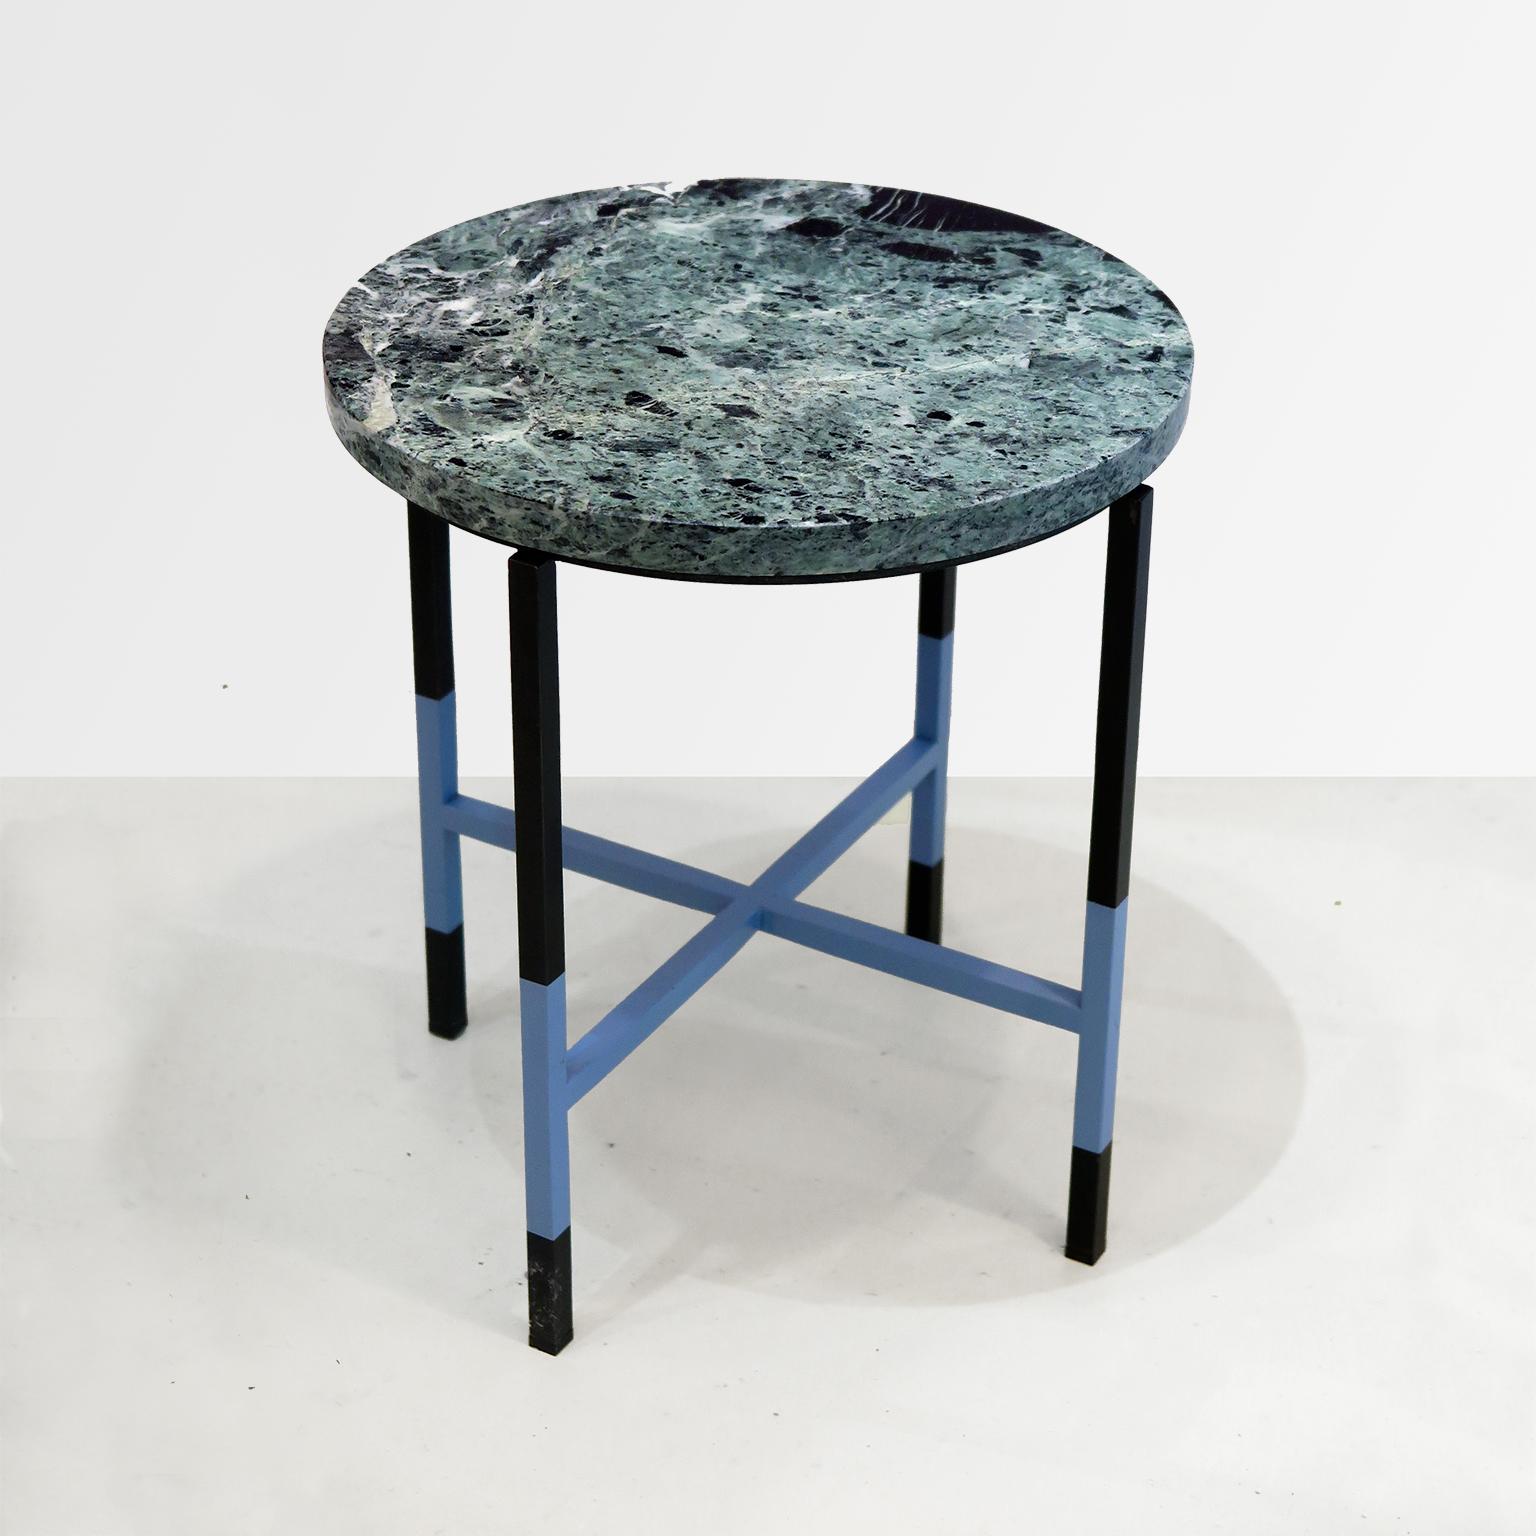 Unique small table with marble top and painted iron base, Italy, 2017.
The table is signed and numbered.